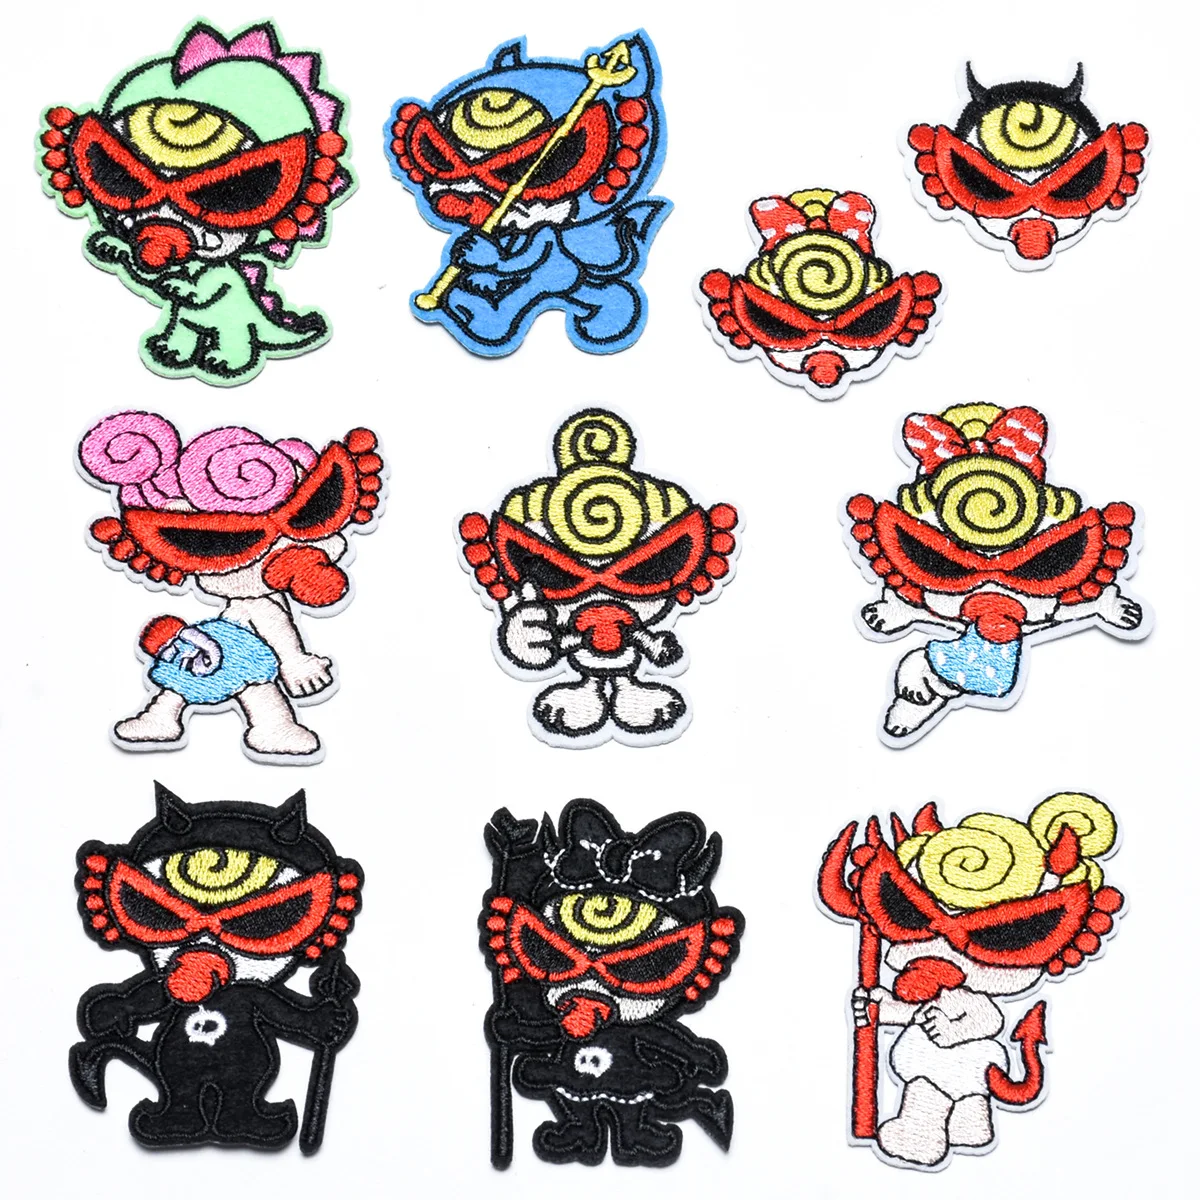 

10Pcs Cute Hysteric Mini Cartoon Series Ironing Embroidered Patches For on Clothes Jeans Hat Sticker Sew Patch Applique Badge